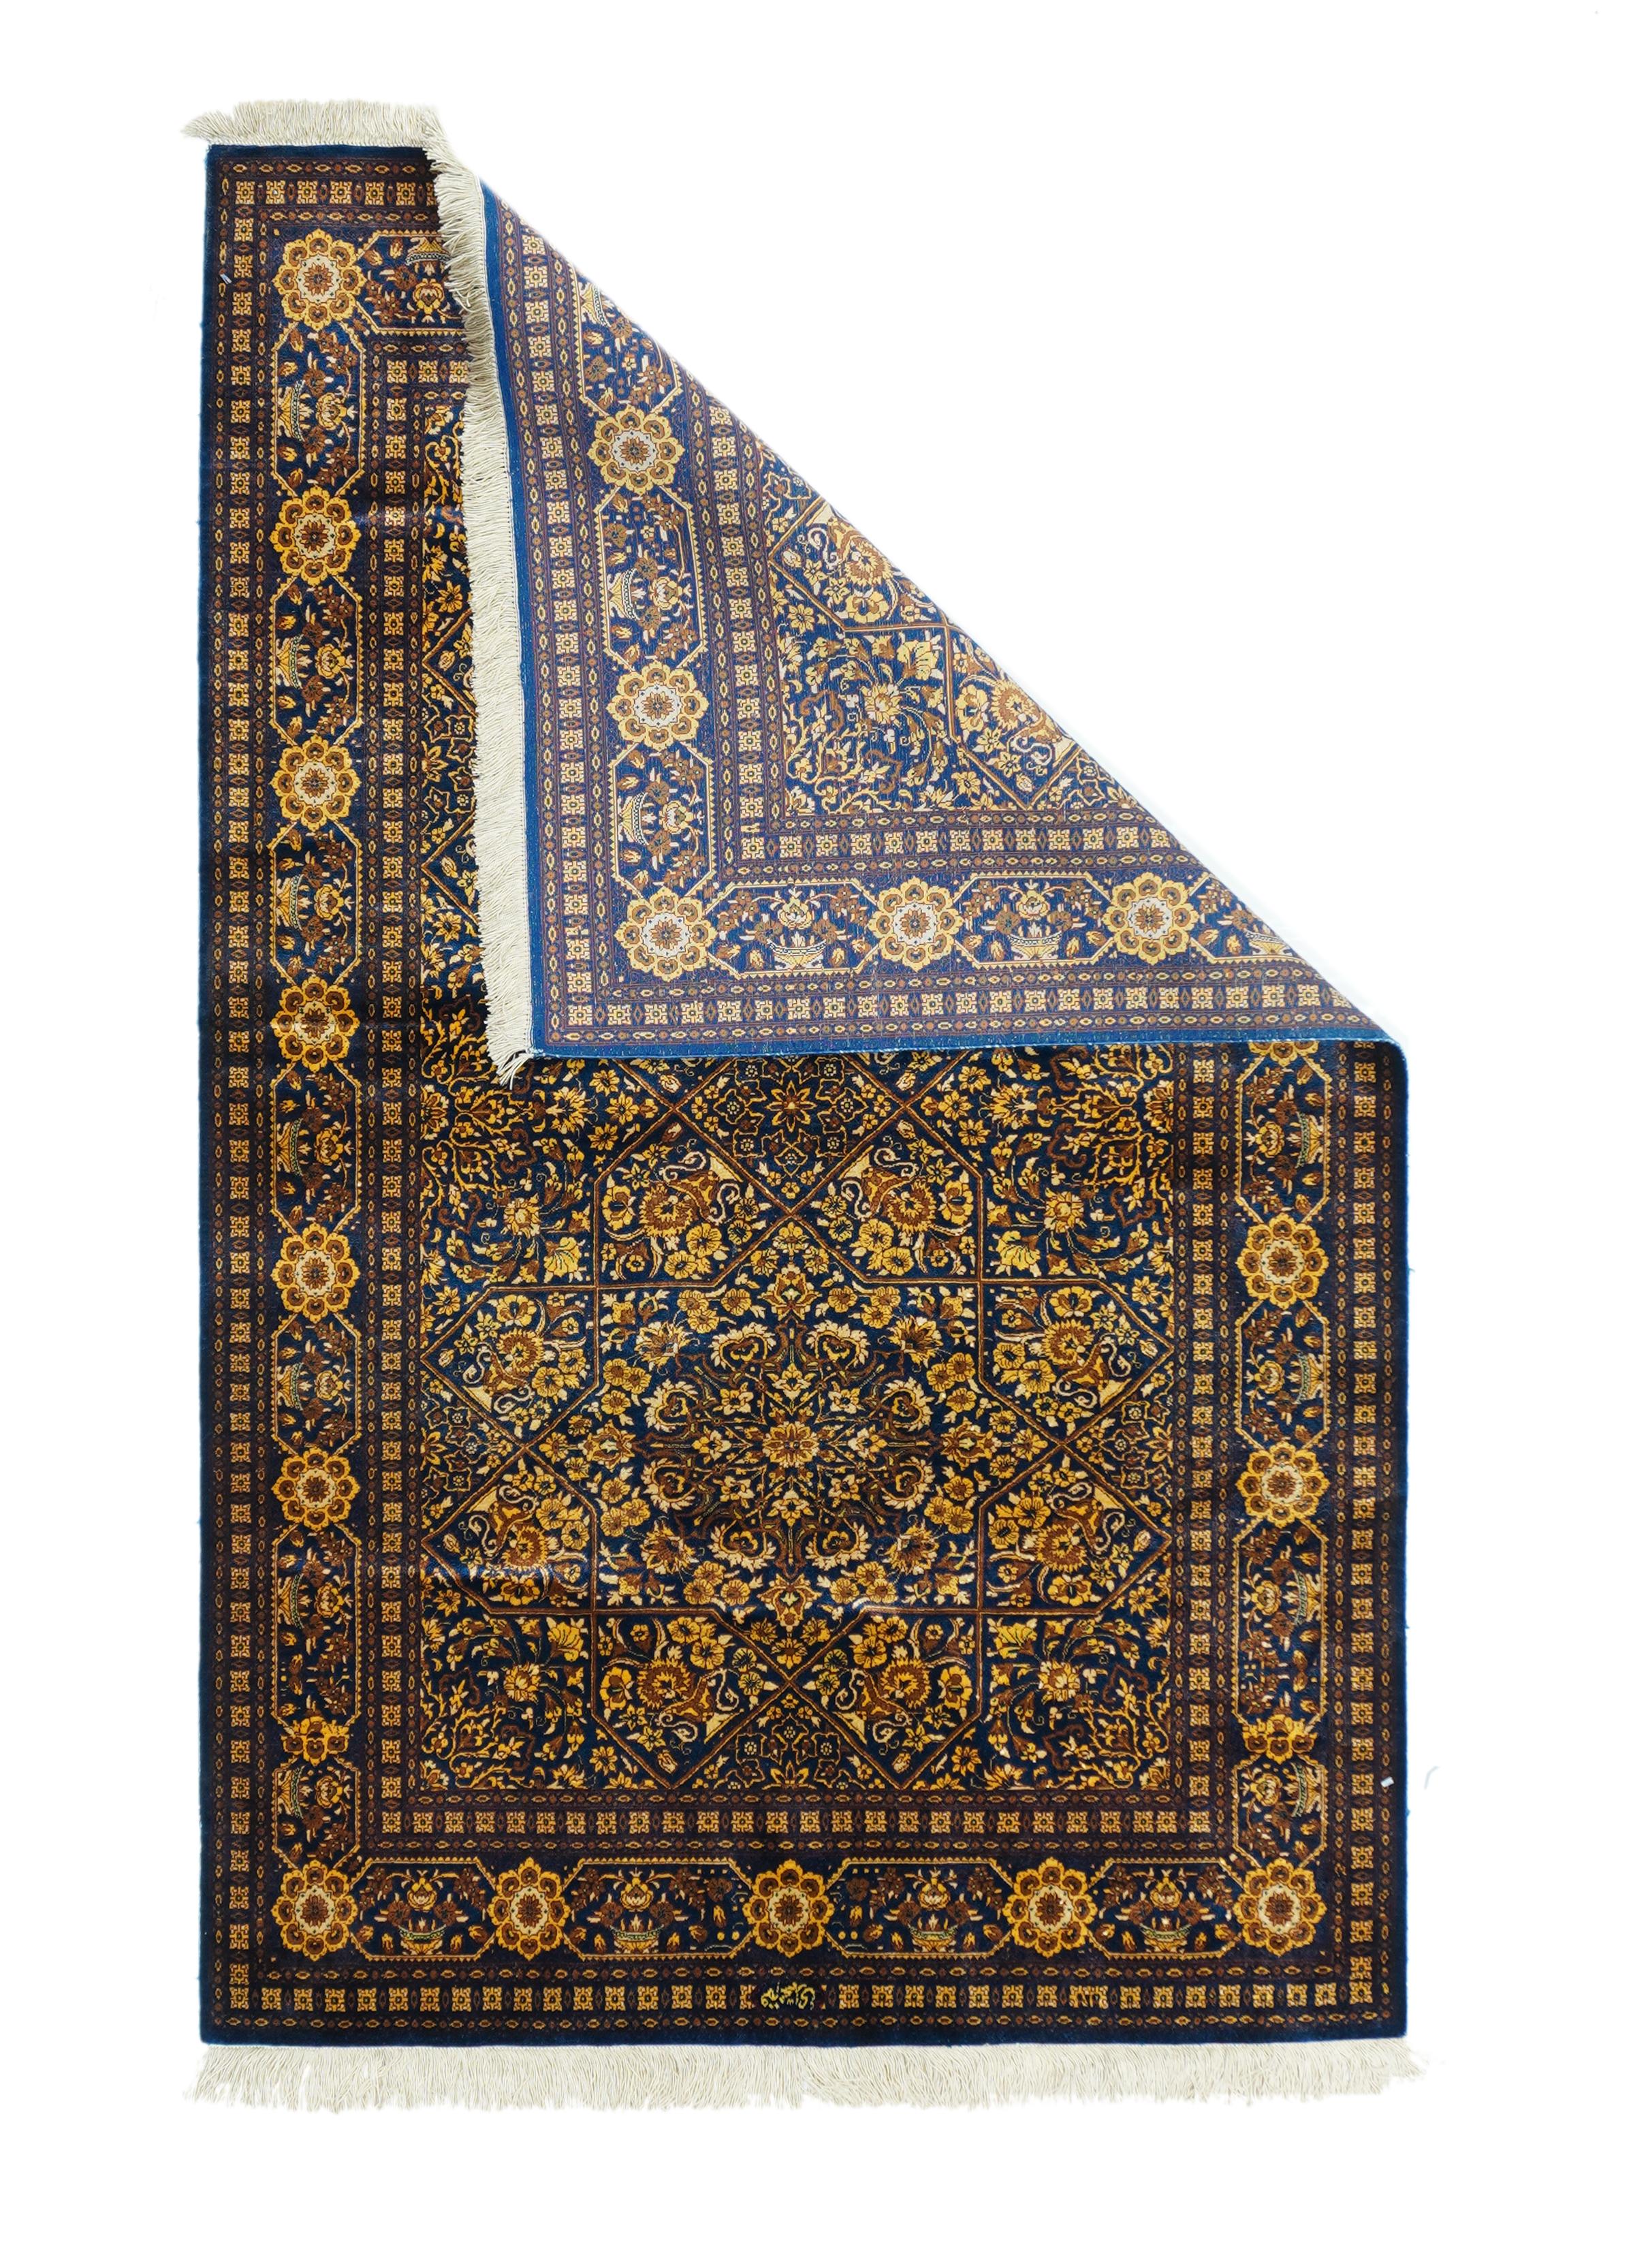 Extremely Fine Persian Silk Qum Rug 3'2'' x 5'2''. This extremely fine, silk foundation, central Persian city scatter shows an unusual dark blue ground very closely patterned with a tile pattern around two discs with radiating flower patterns. More